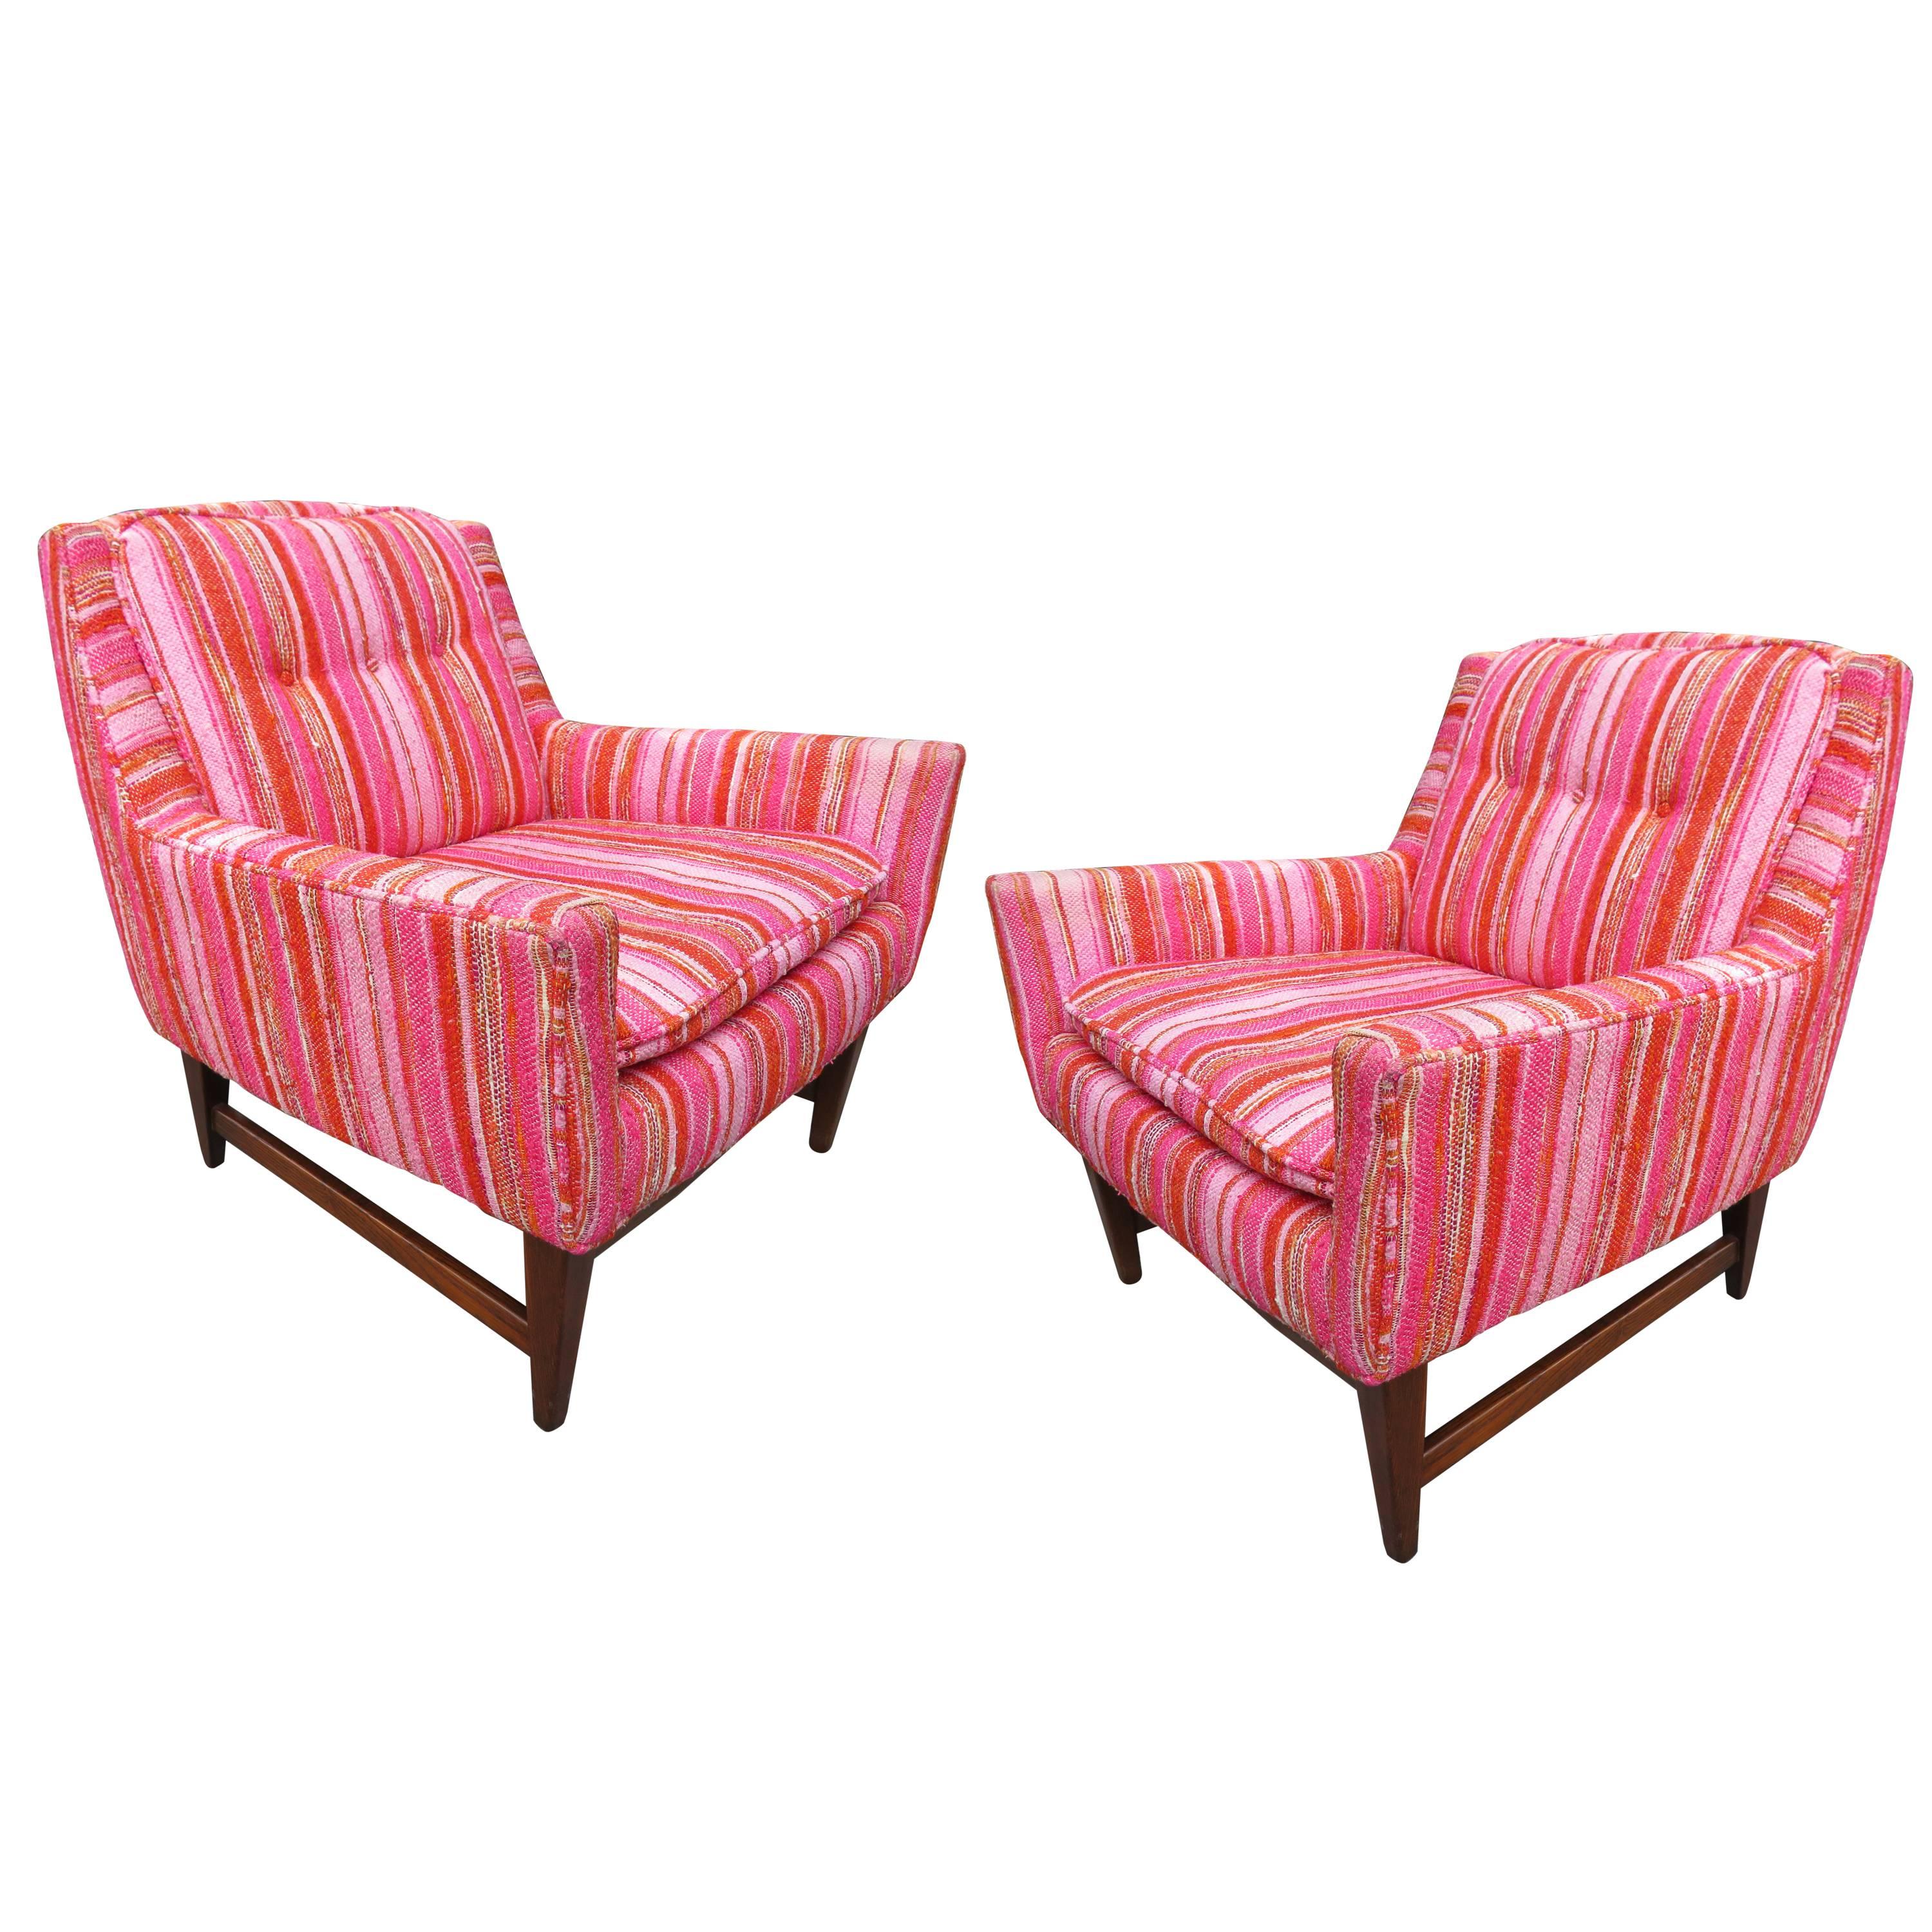 Lovely Pair of Selig Mid-Century Modern Walnut Lounge Chairs